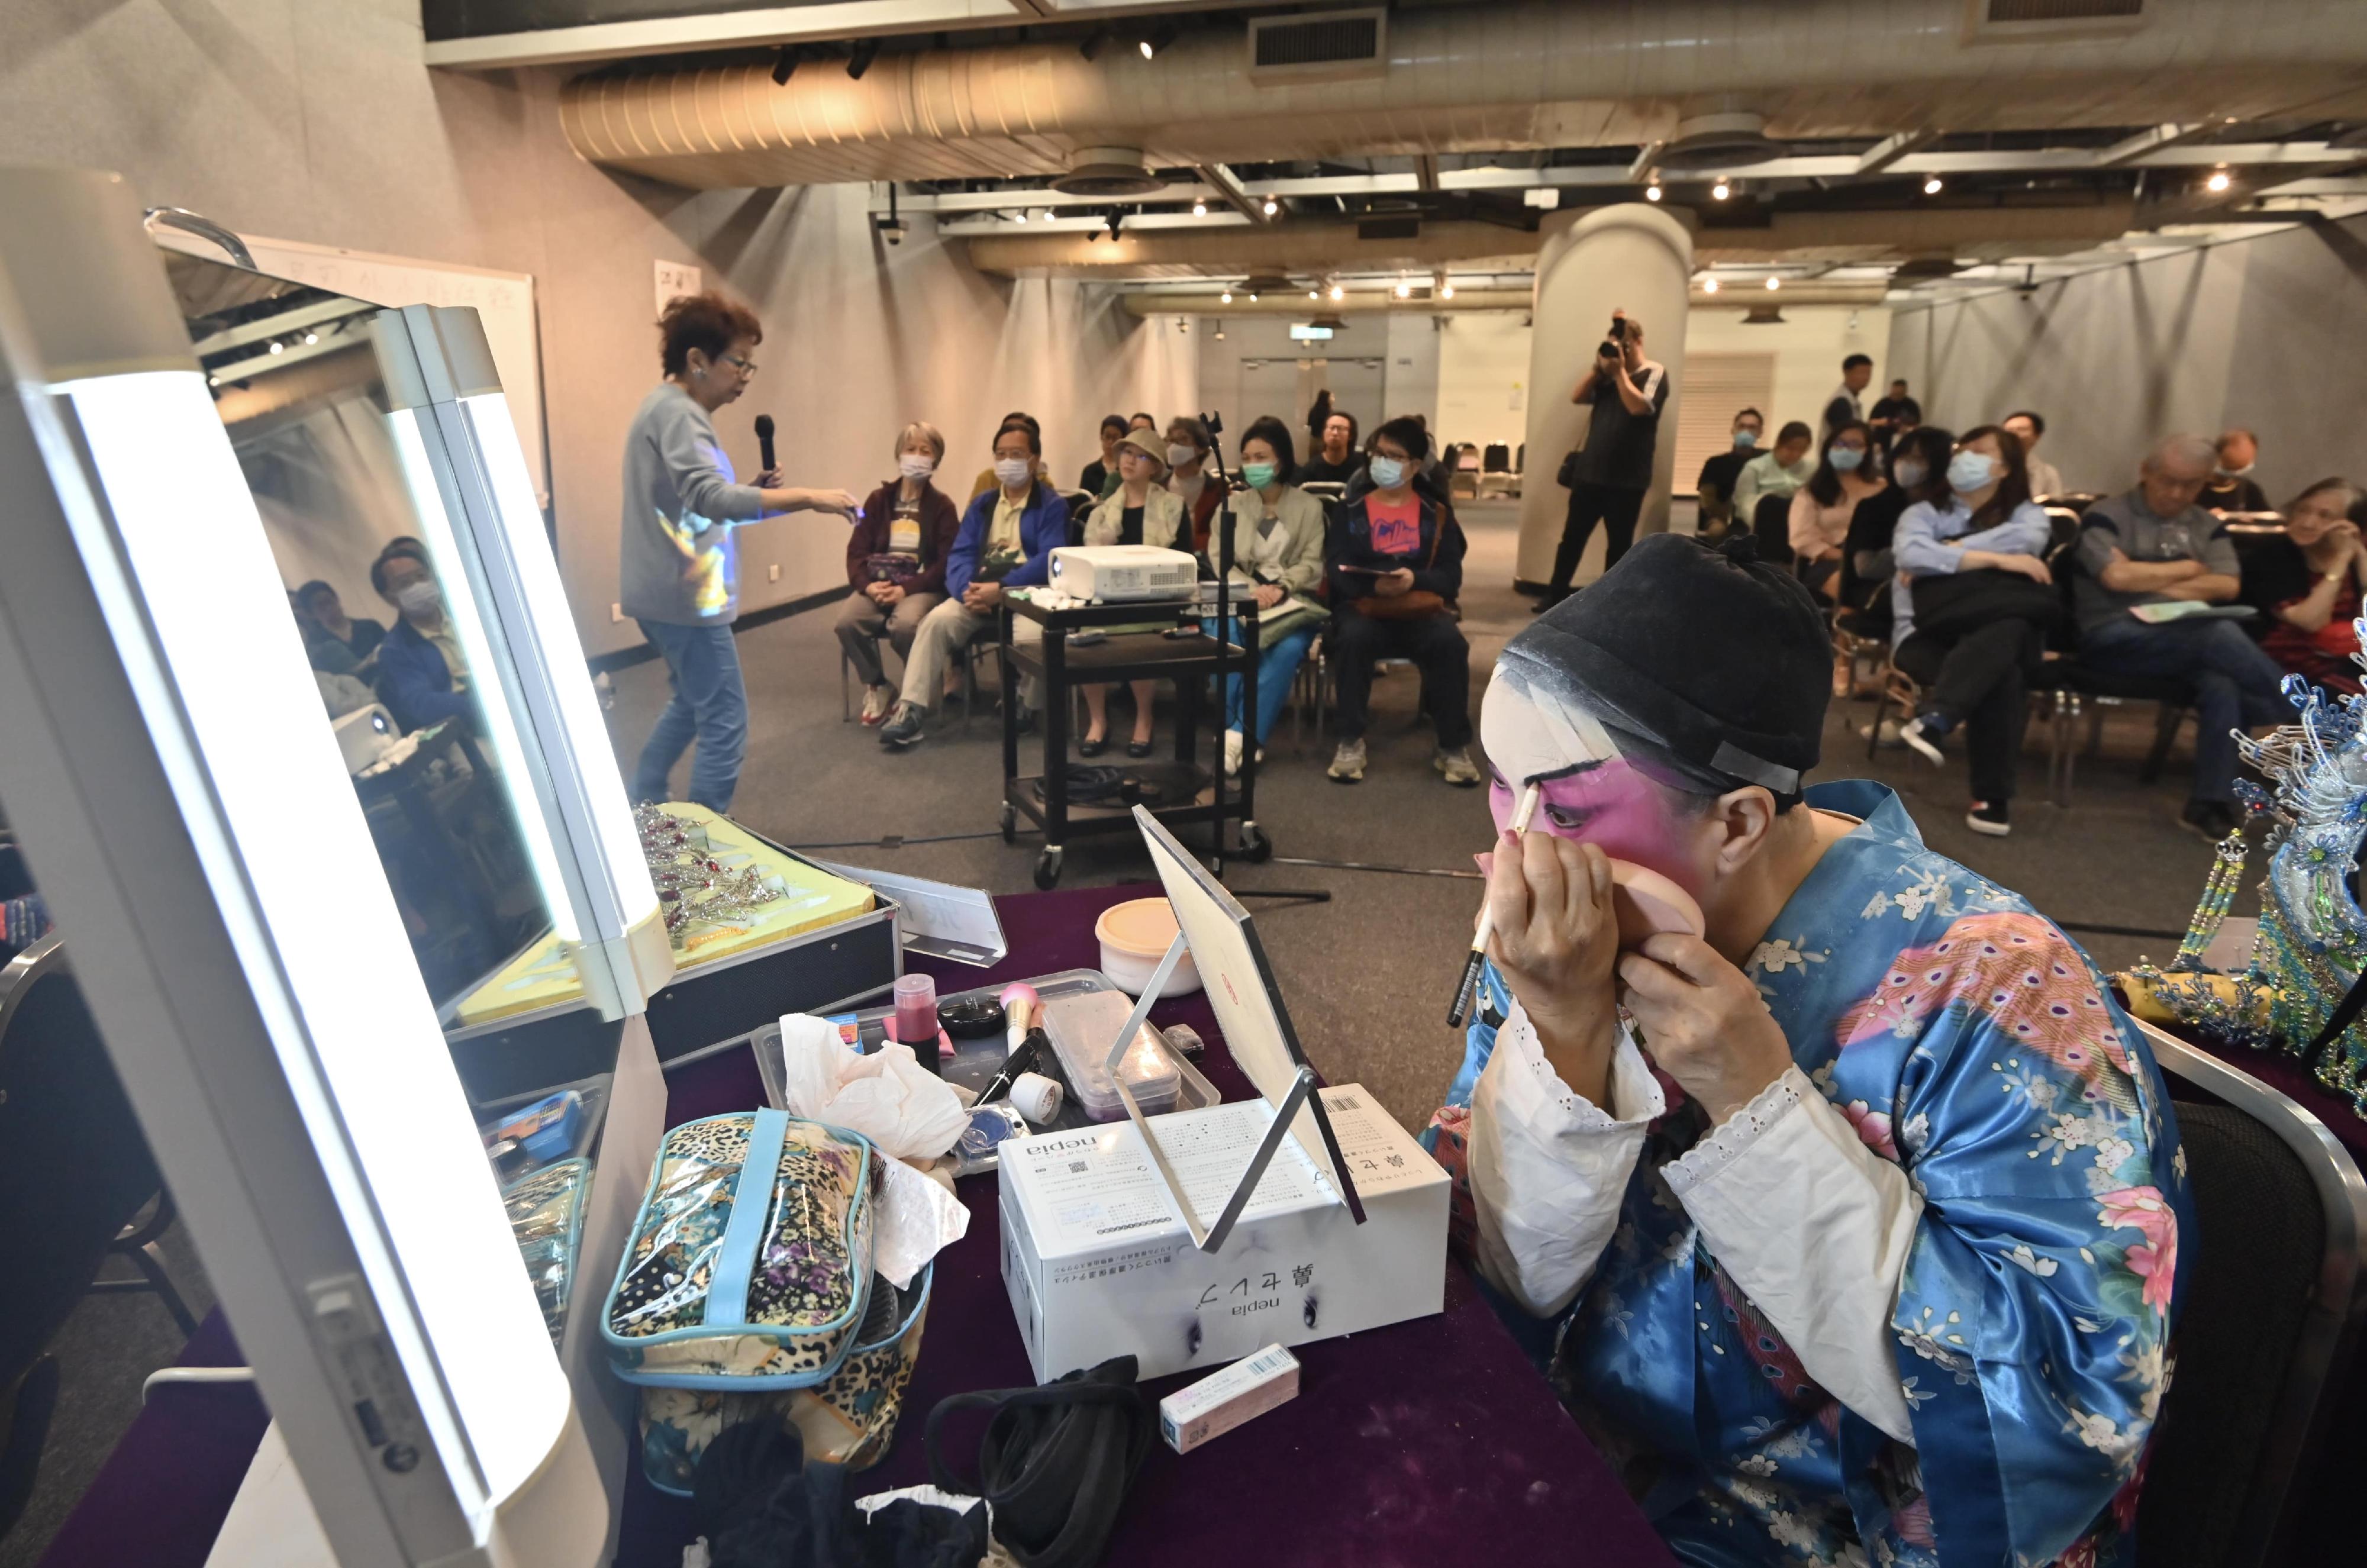 The annual Cantonese Opera Day, presented by the Leisure and Cultural Services Department, was held this afternoon (November 26). Photo shows a Cantonese opera performer demonstrating make-up skills to the audiences.